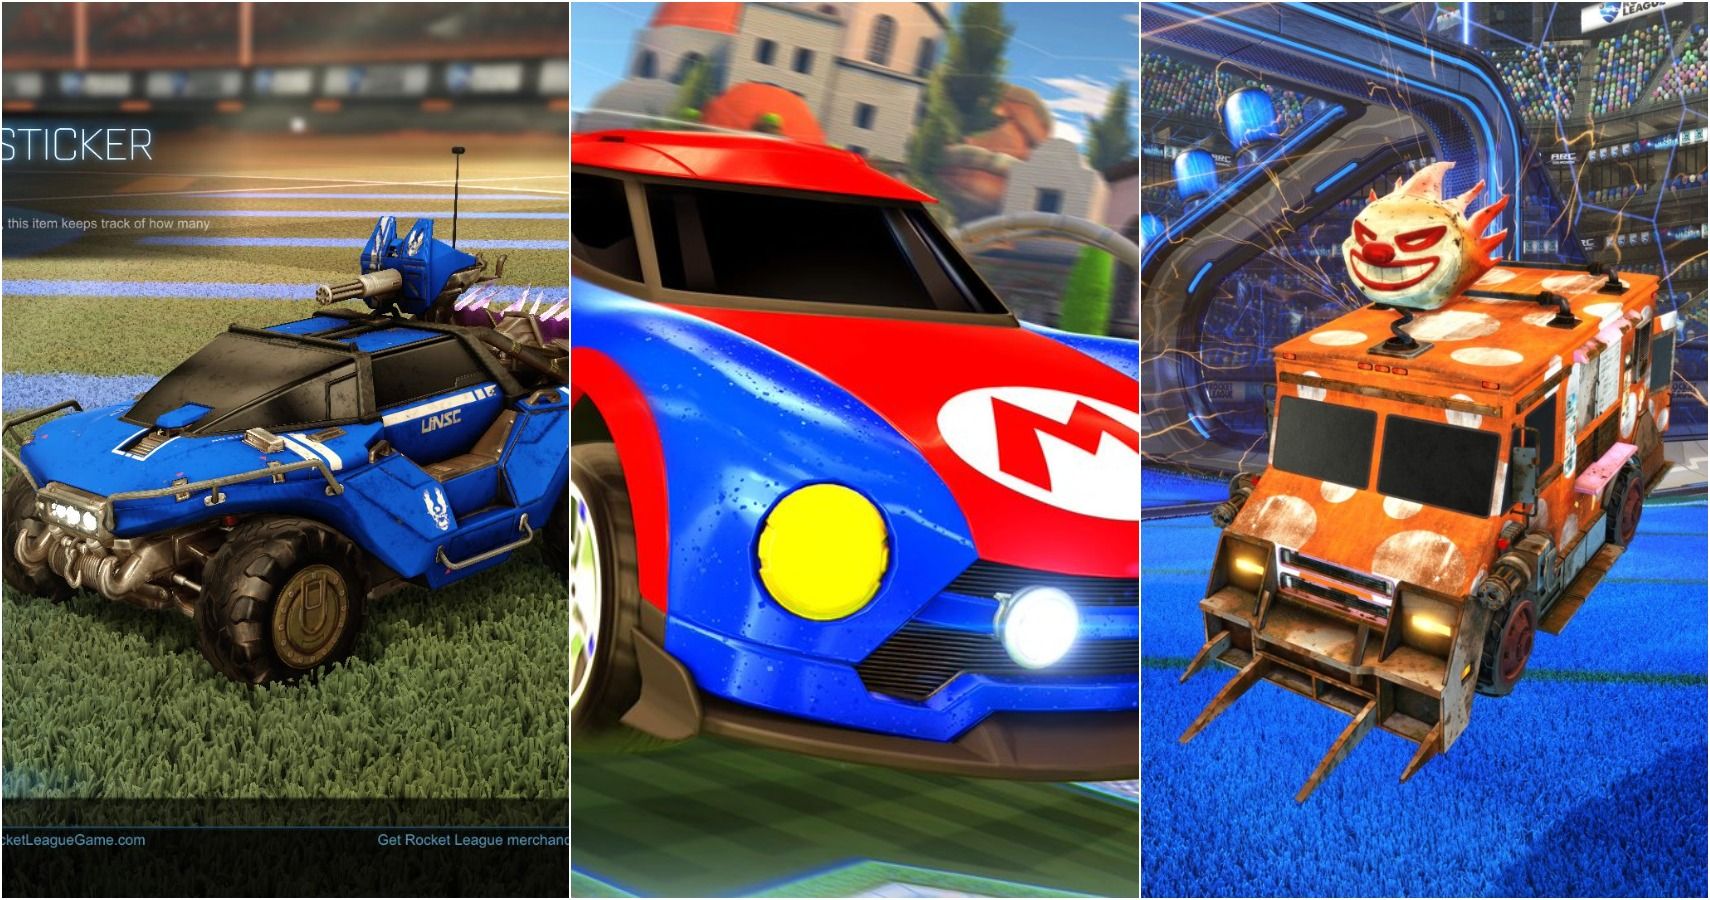 split image of Hogsticker, Mario NSR, and Sweet Tooth cars in Rocket League